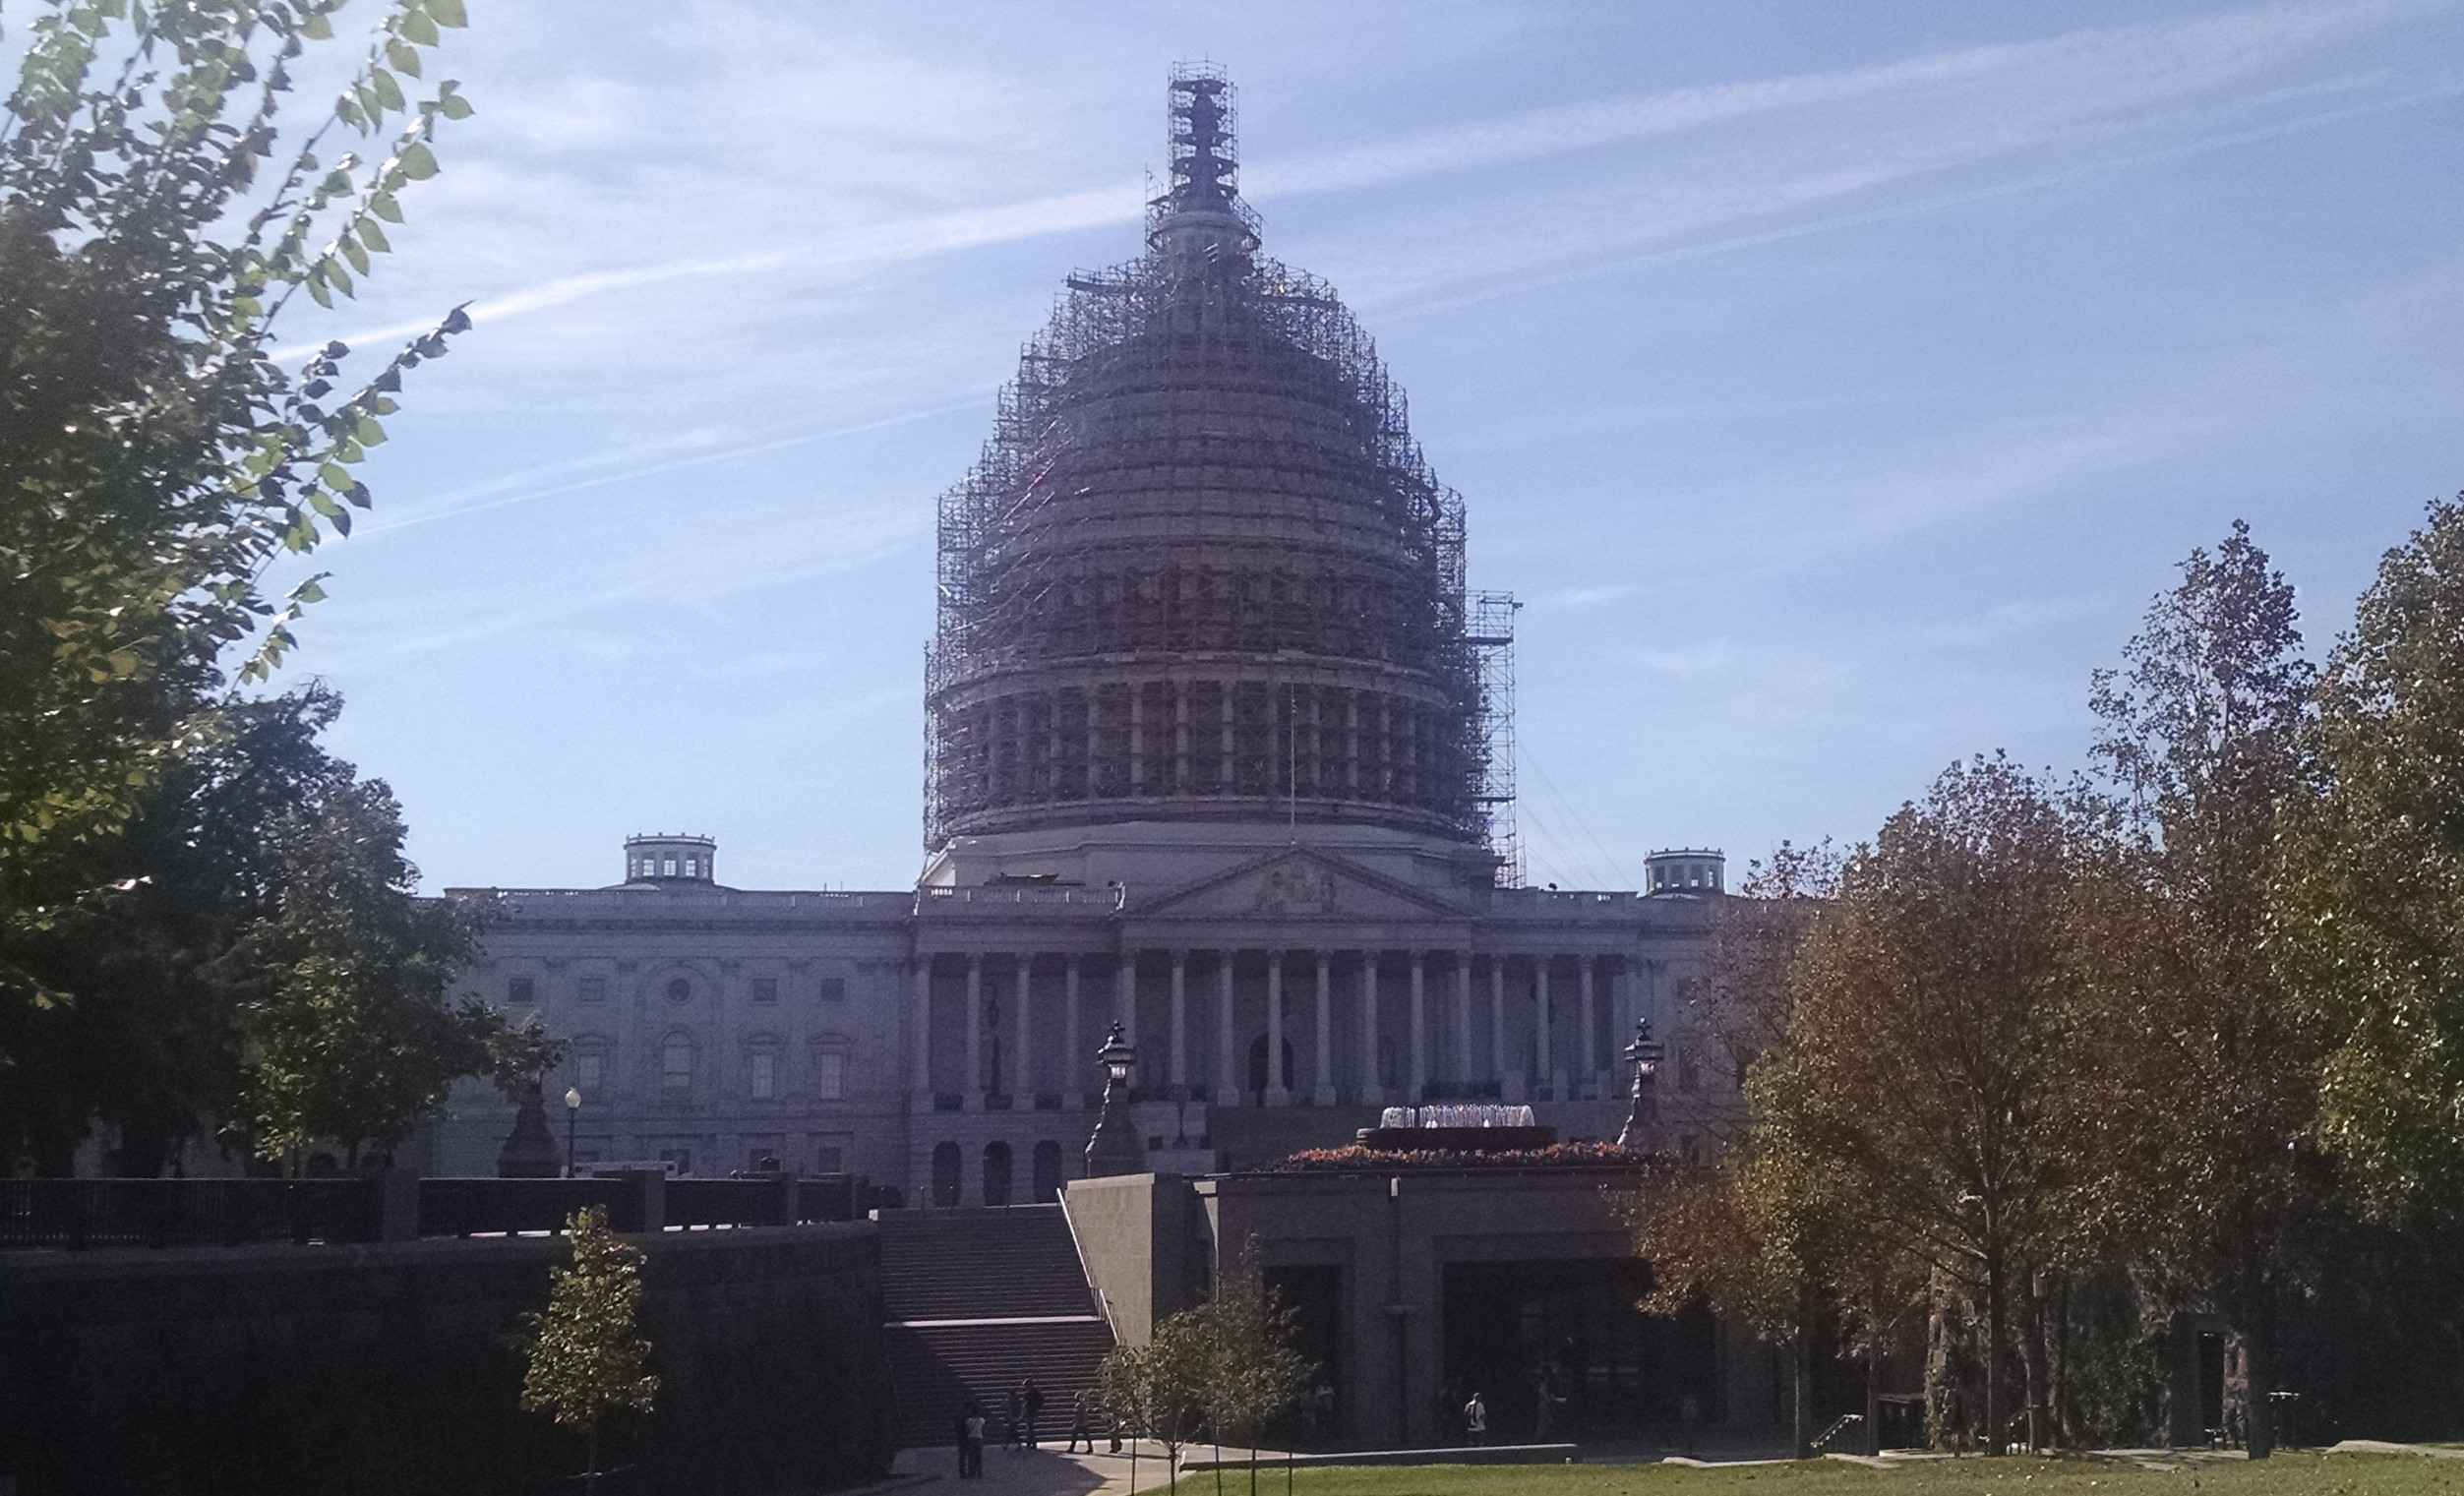 The Capitol dome isn't the only thing under construction. The FY 2016 budget still isn't complete.